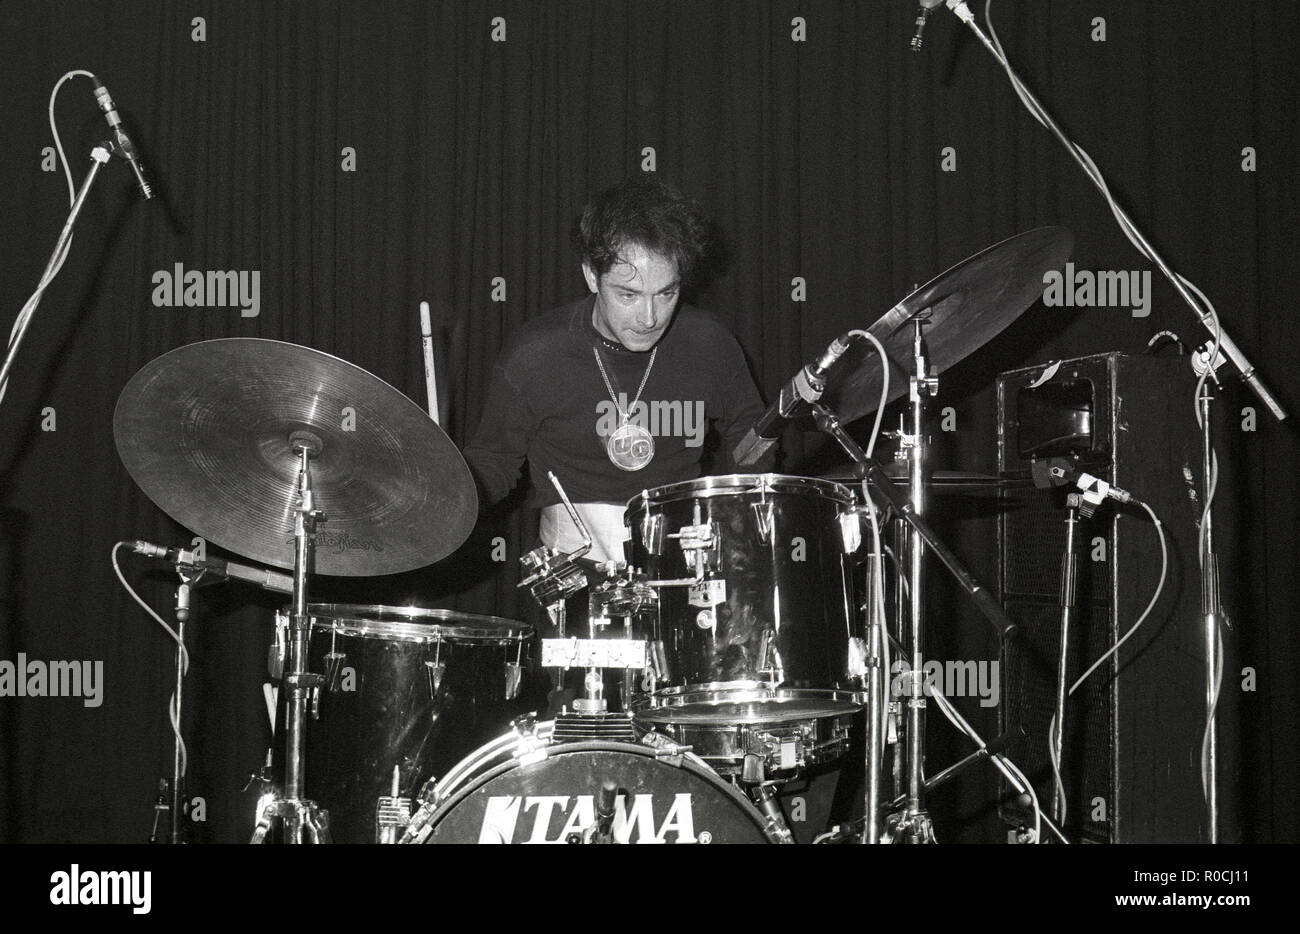 Drummer Blackie Onassis from alternative rock band Urge Overkill performing at The Venue, New Cross, London, 12th April 1991. Stock Photo